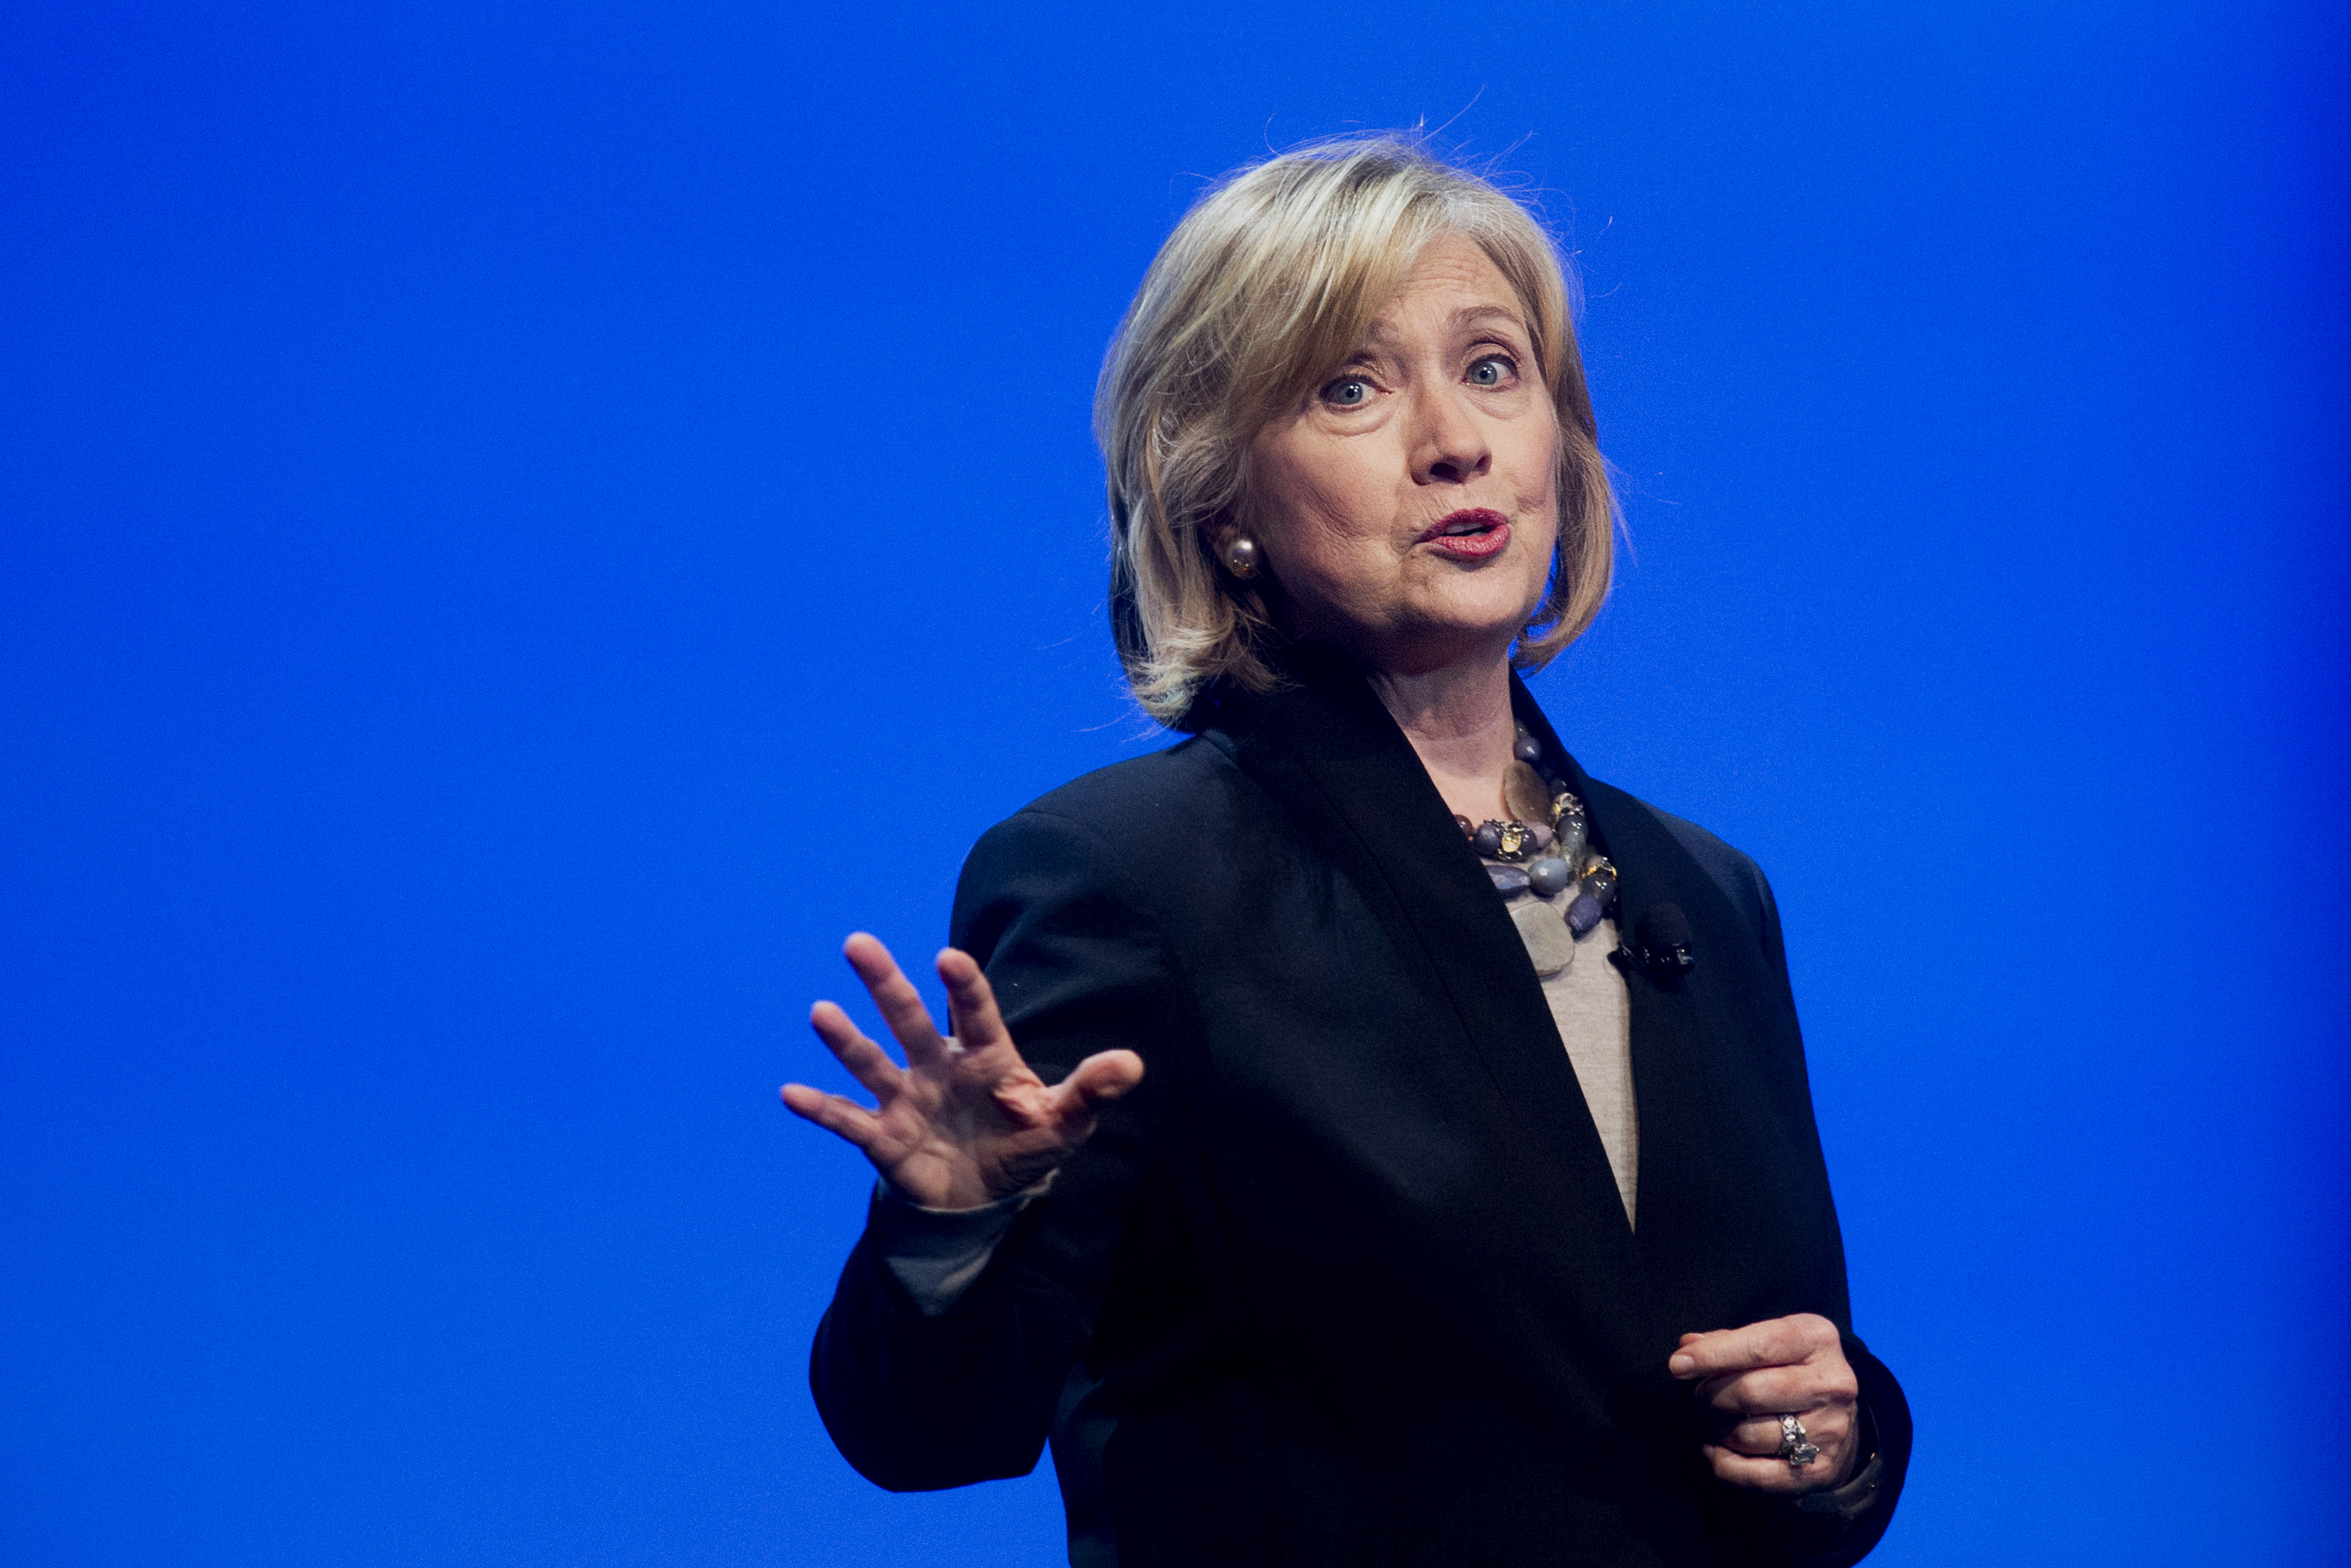 Hillary Clinton, former U.S. secretary of state, speaks during the DreamForce Conference in San Francisco, California, U.S., on Tuesday, Oct. 14, 2014. (Bloomberg&mdash;Bloomberg via Getty Images)